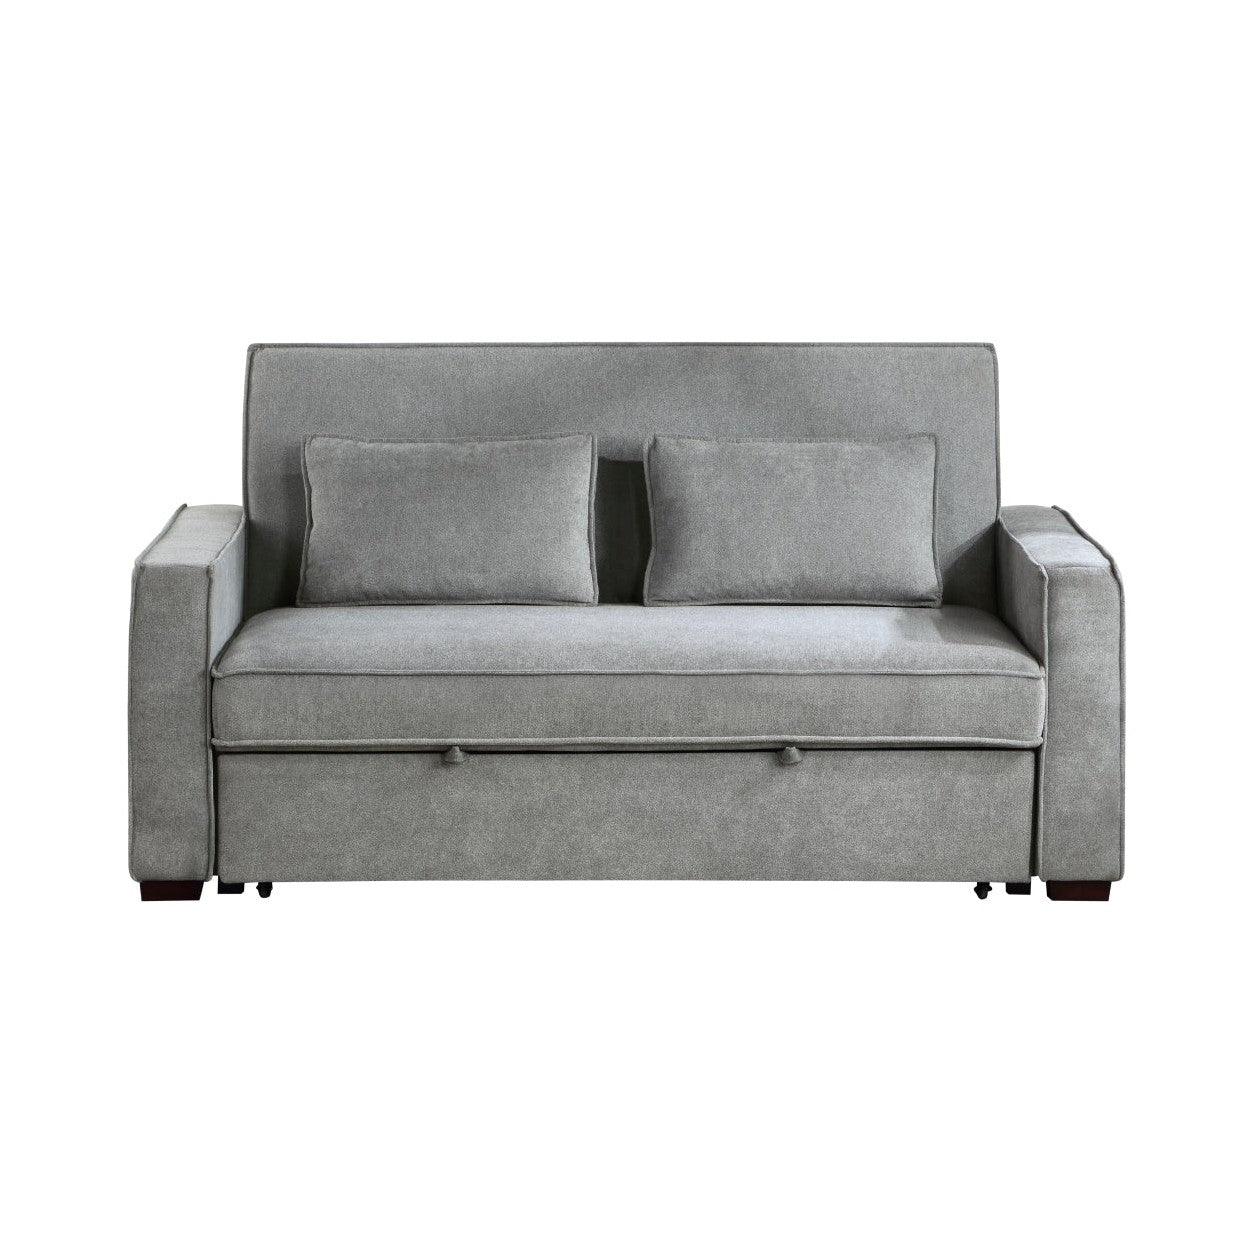 Homelegance Sofa W/ Pull-Out Bed(Click-Clack Back), Gray